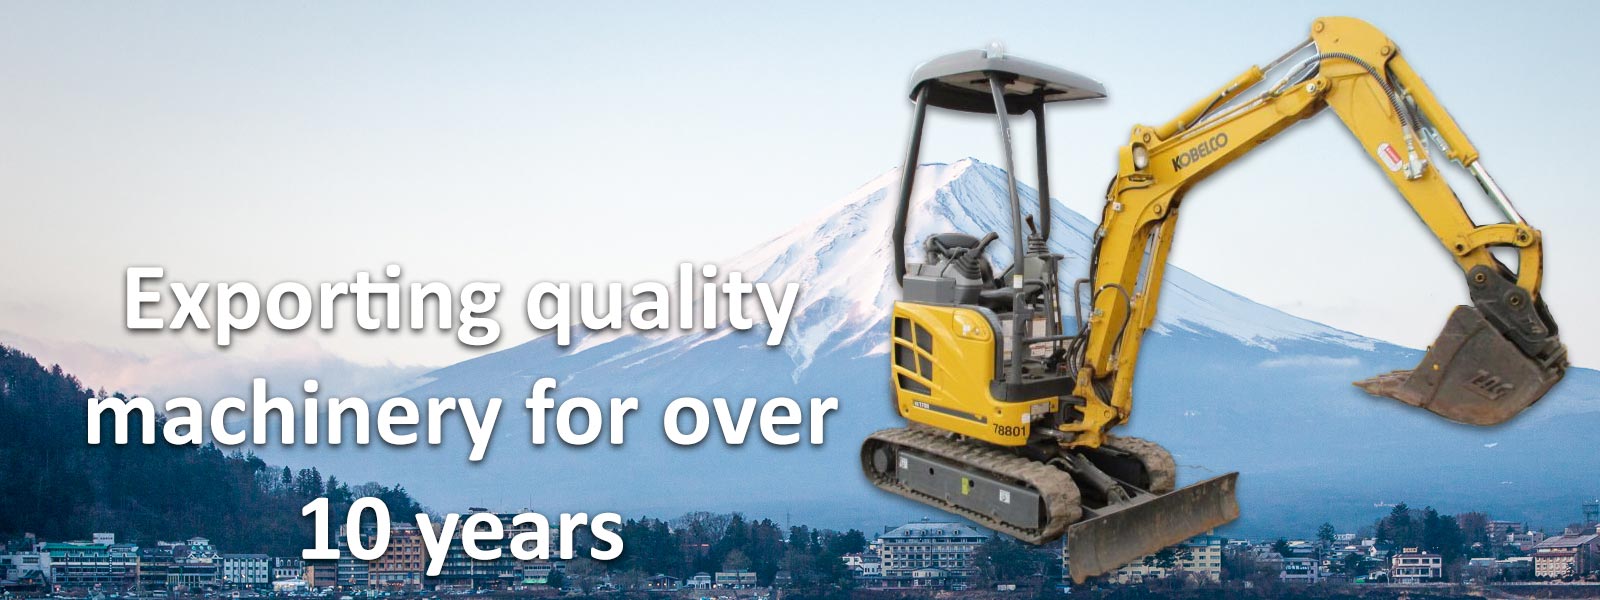 Exporting Japanese machinery for over 10 years